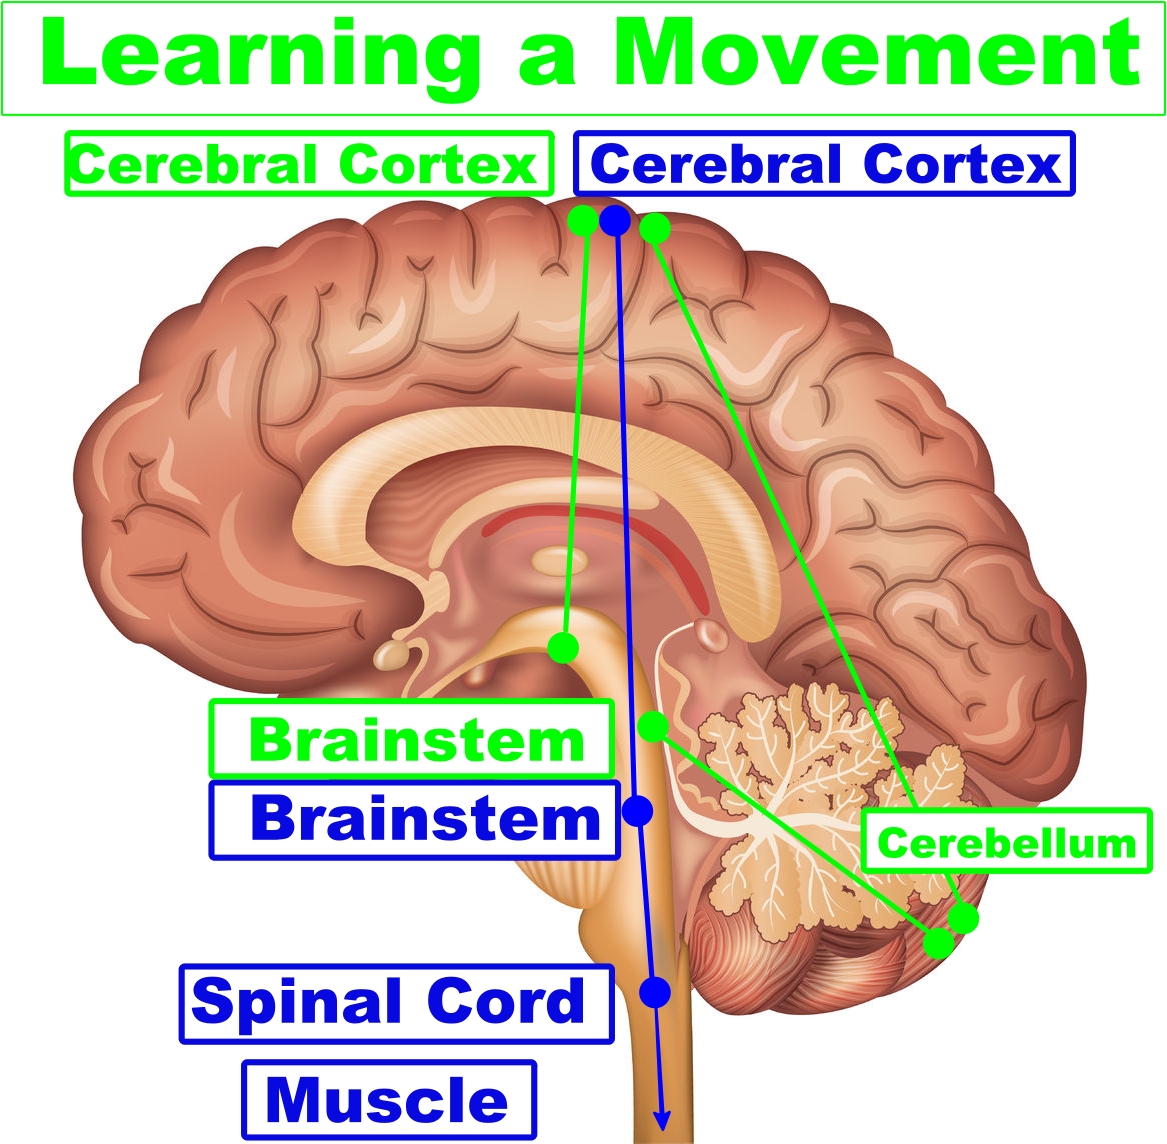 vector image of the brain regions involved in learning a movement